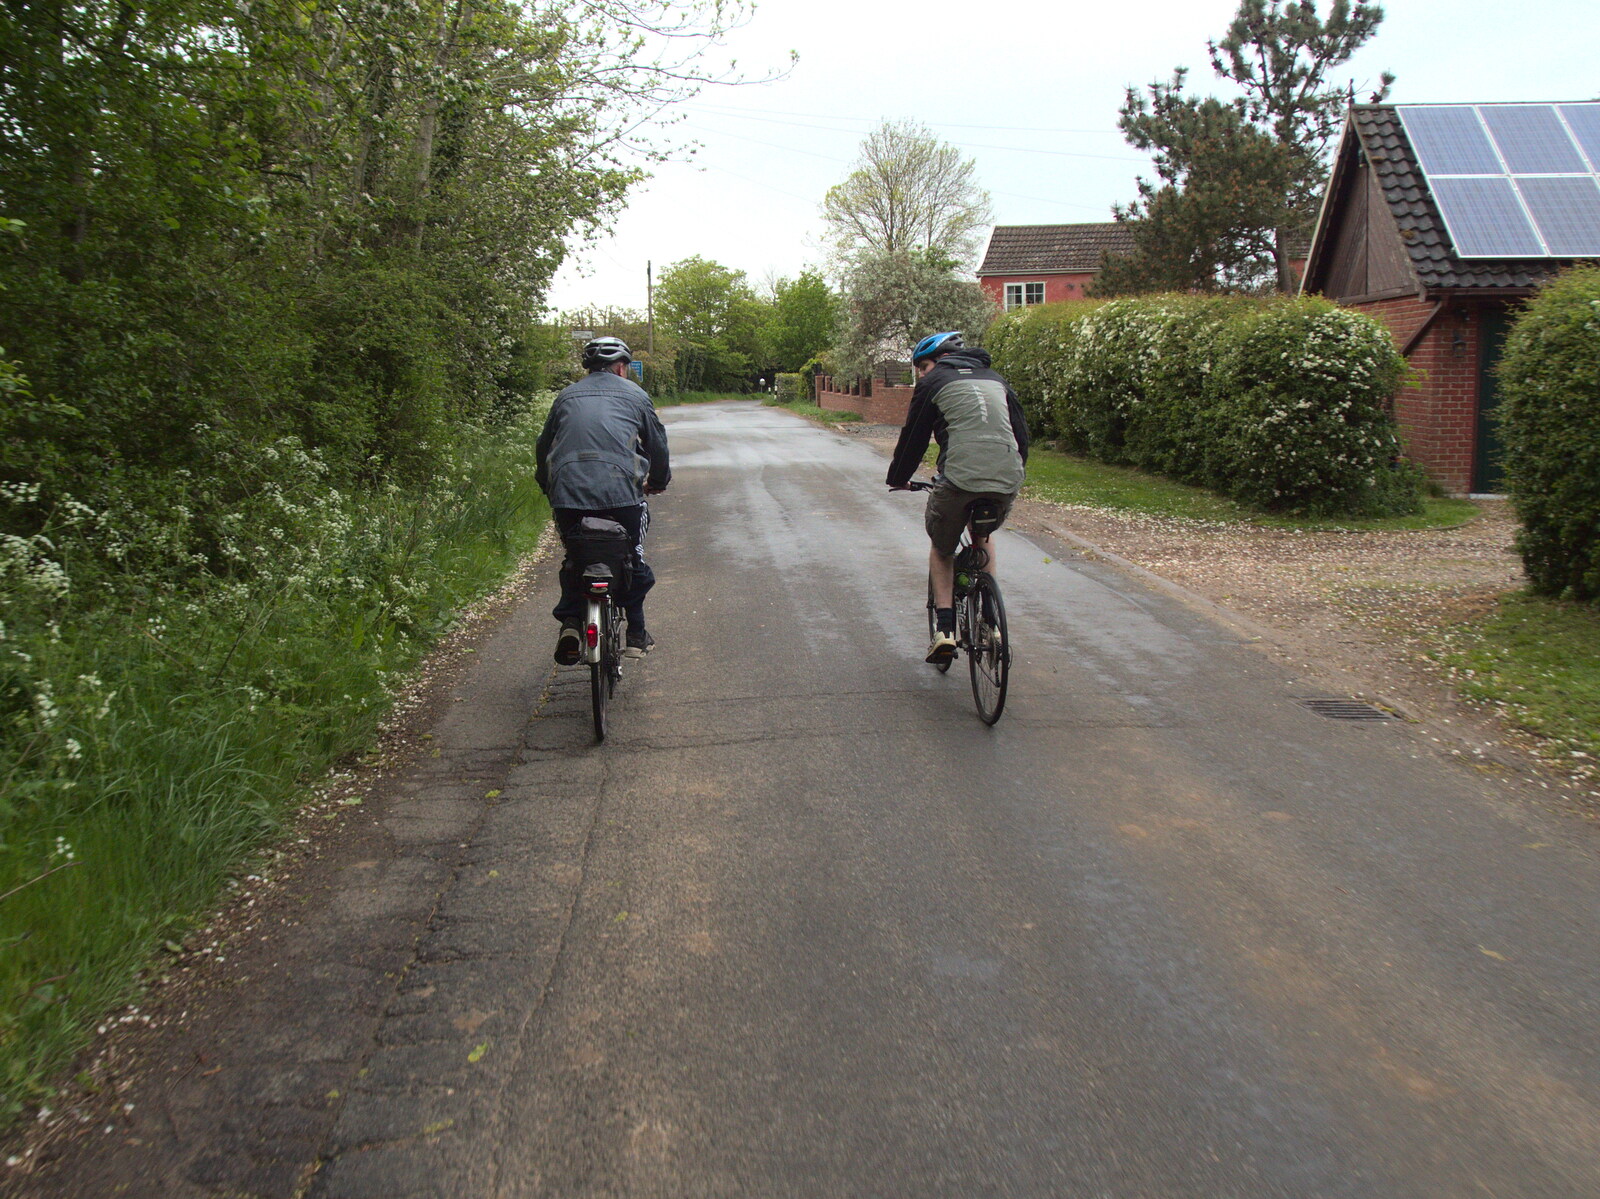 We head off up the road to Thrandeston from The BSCC at the Ampersand Tap, Sawmills Road, Diss, Norfolk - 20th May 2021